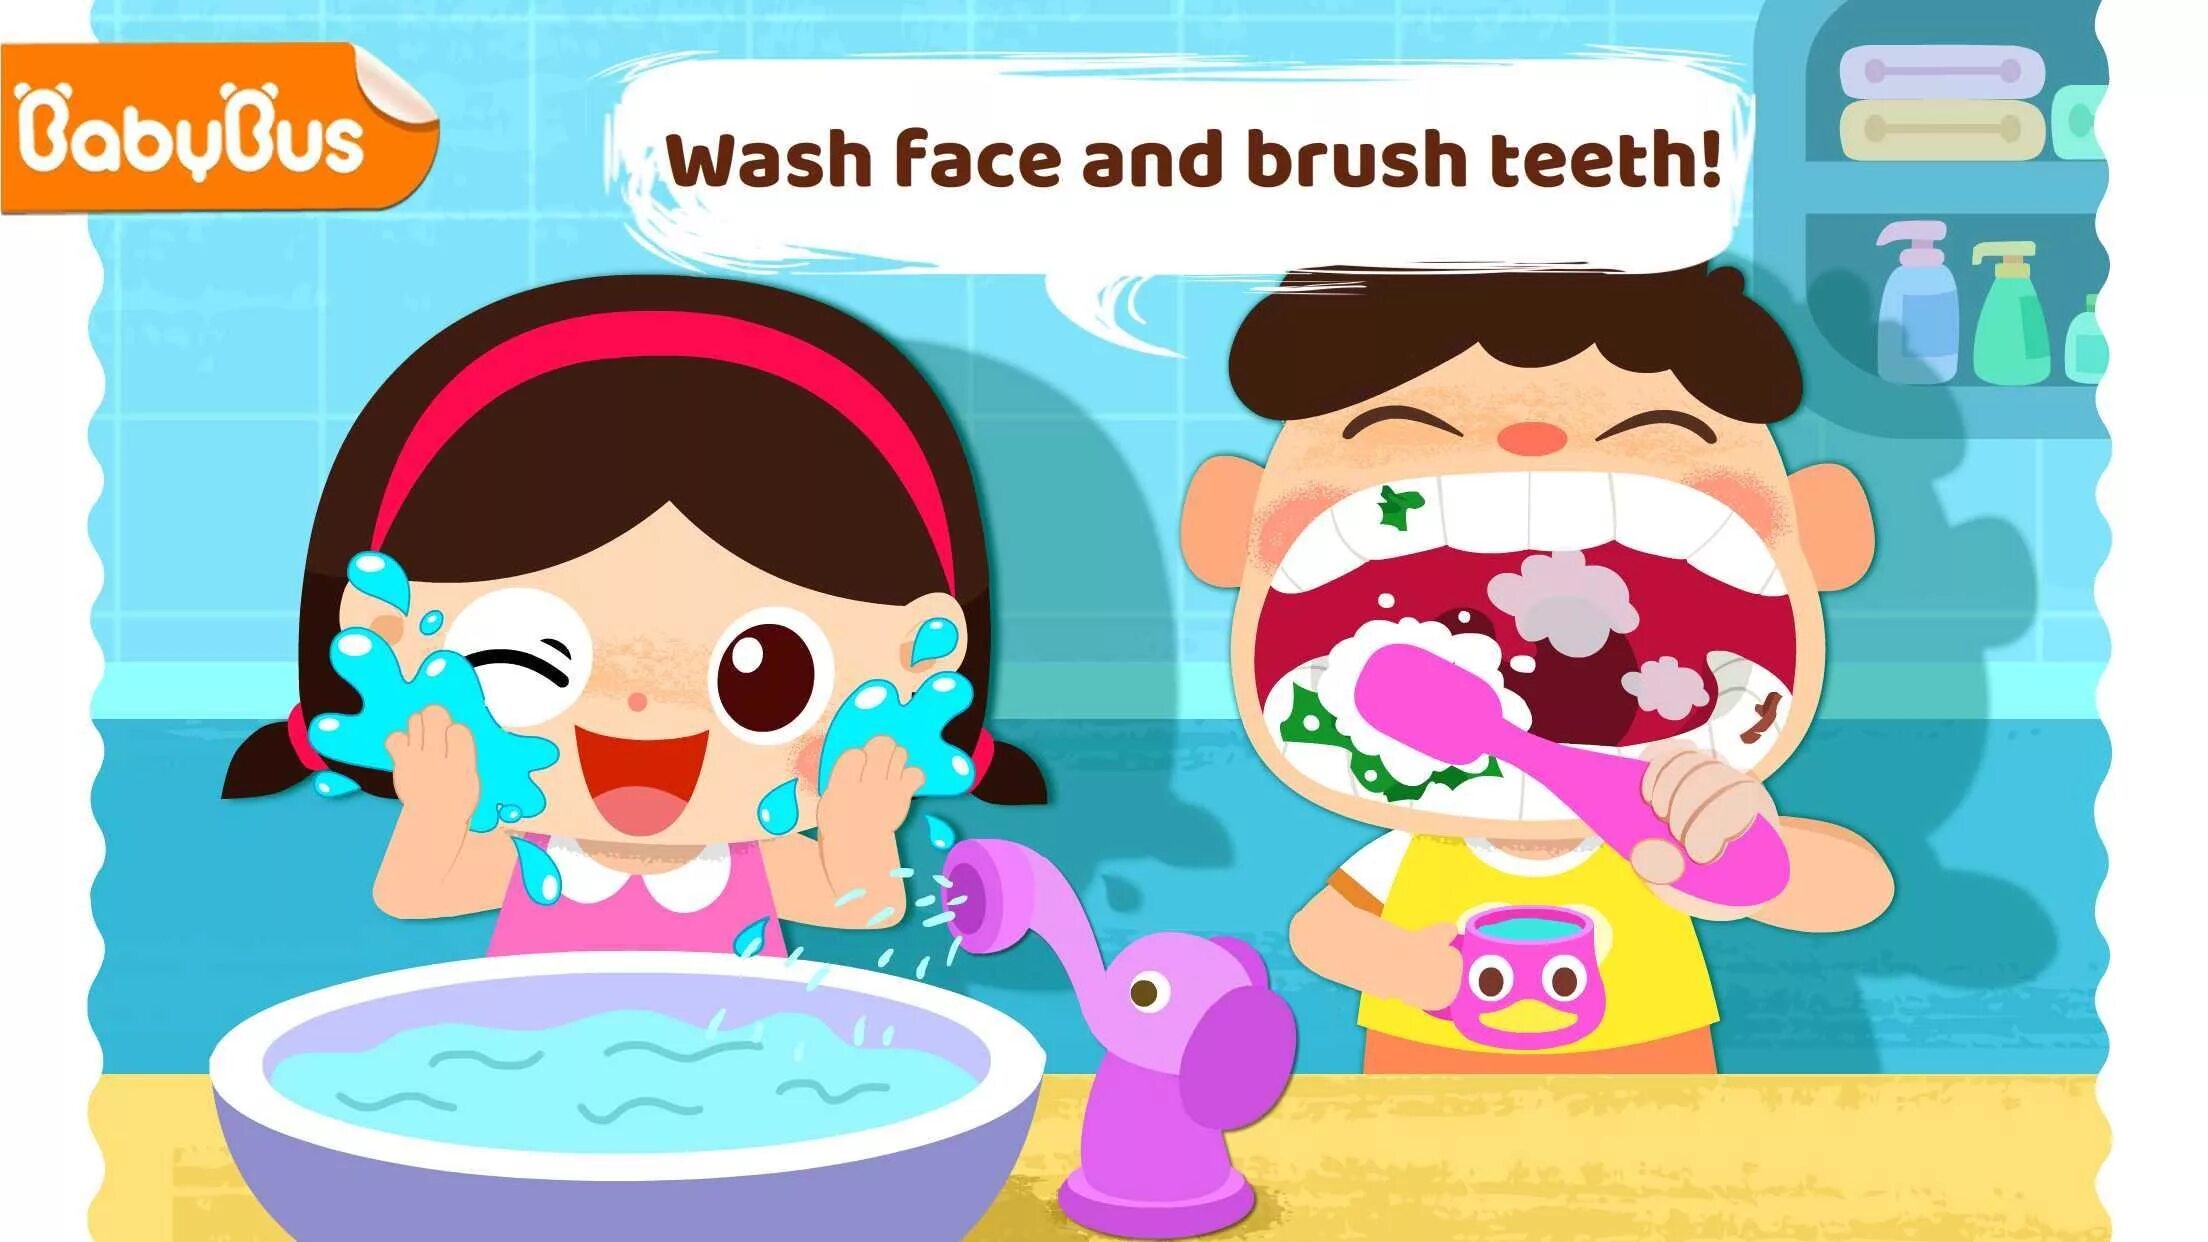 I wash and clean my teeth. BABYBUS привычки. BABYBUS Daily Habits игра. Малыш Панда привычки игра. Baby Panda Care BABYBUS.